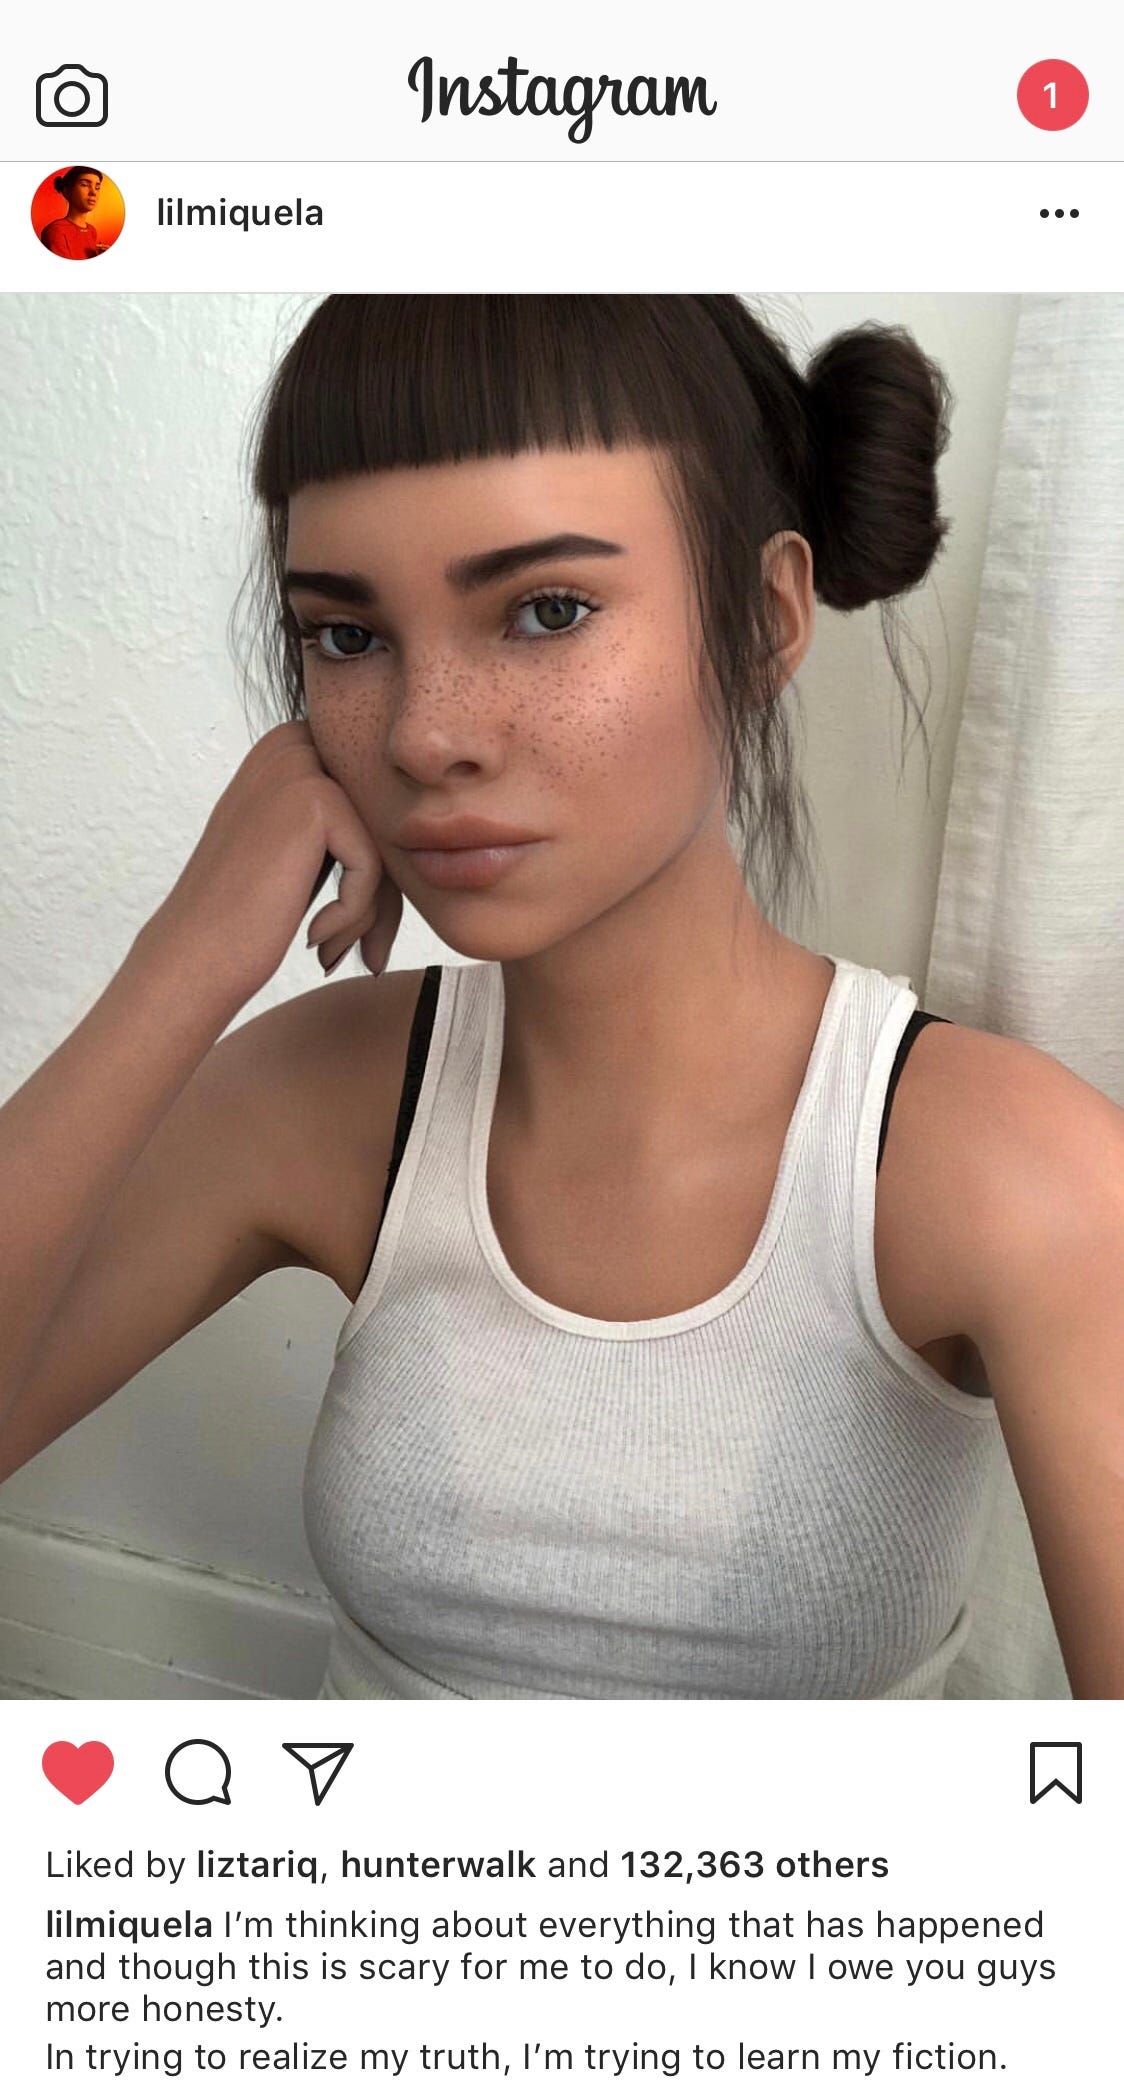 galning Downtown virtuel Blurred lines between digital and physical reality; Lil Miquela goes heart  to heart after hack by Bermuda, two virtual people | by Jacob Mullins |  Medium